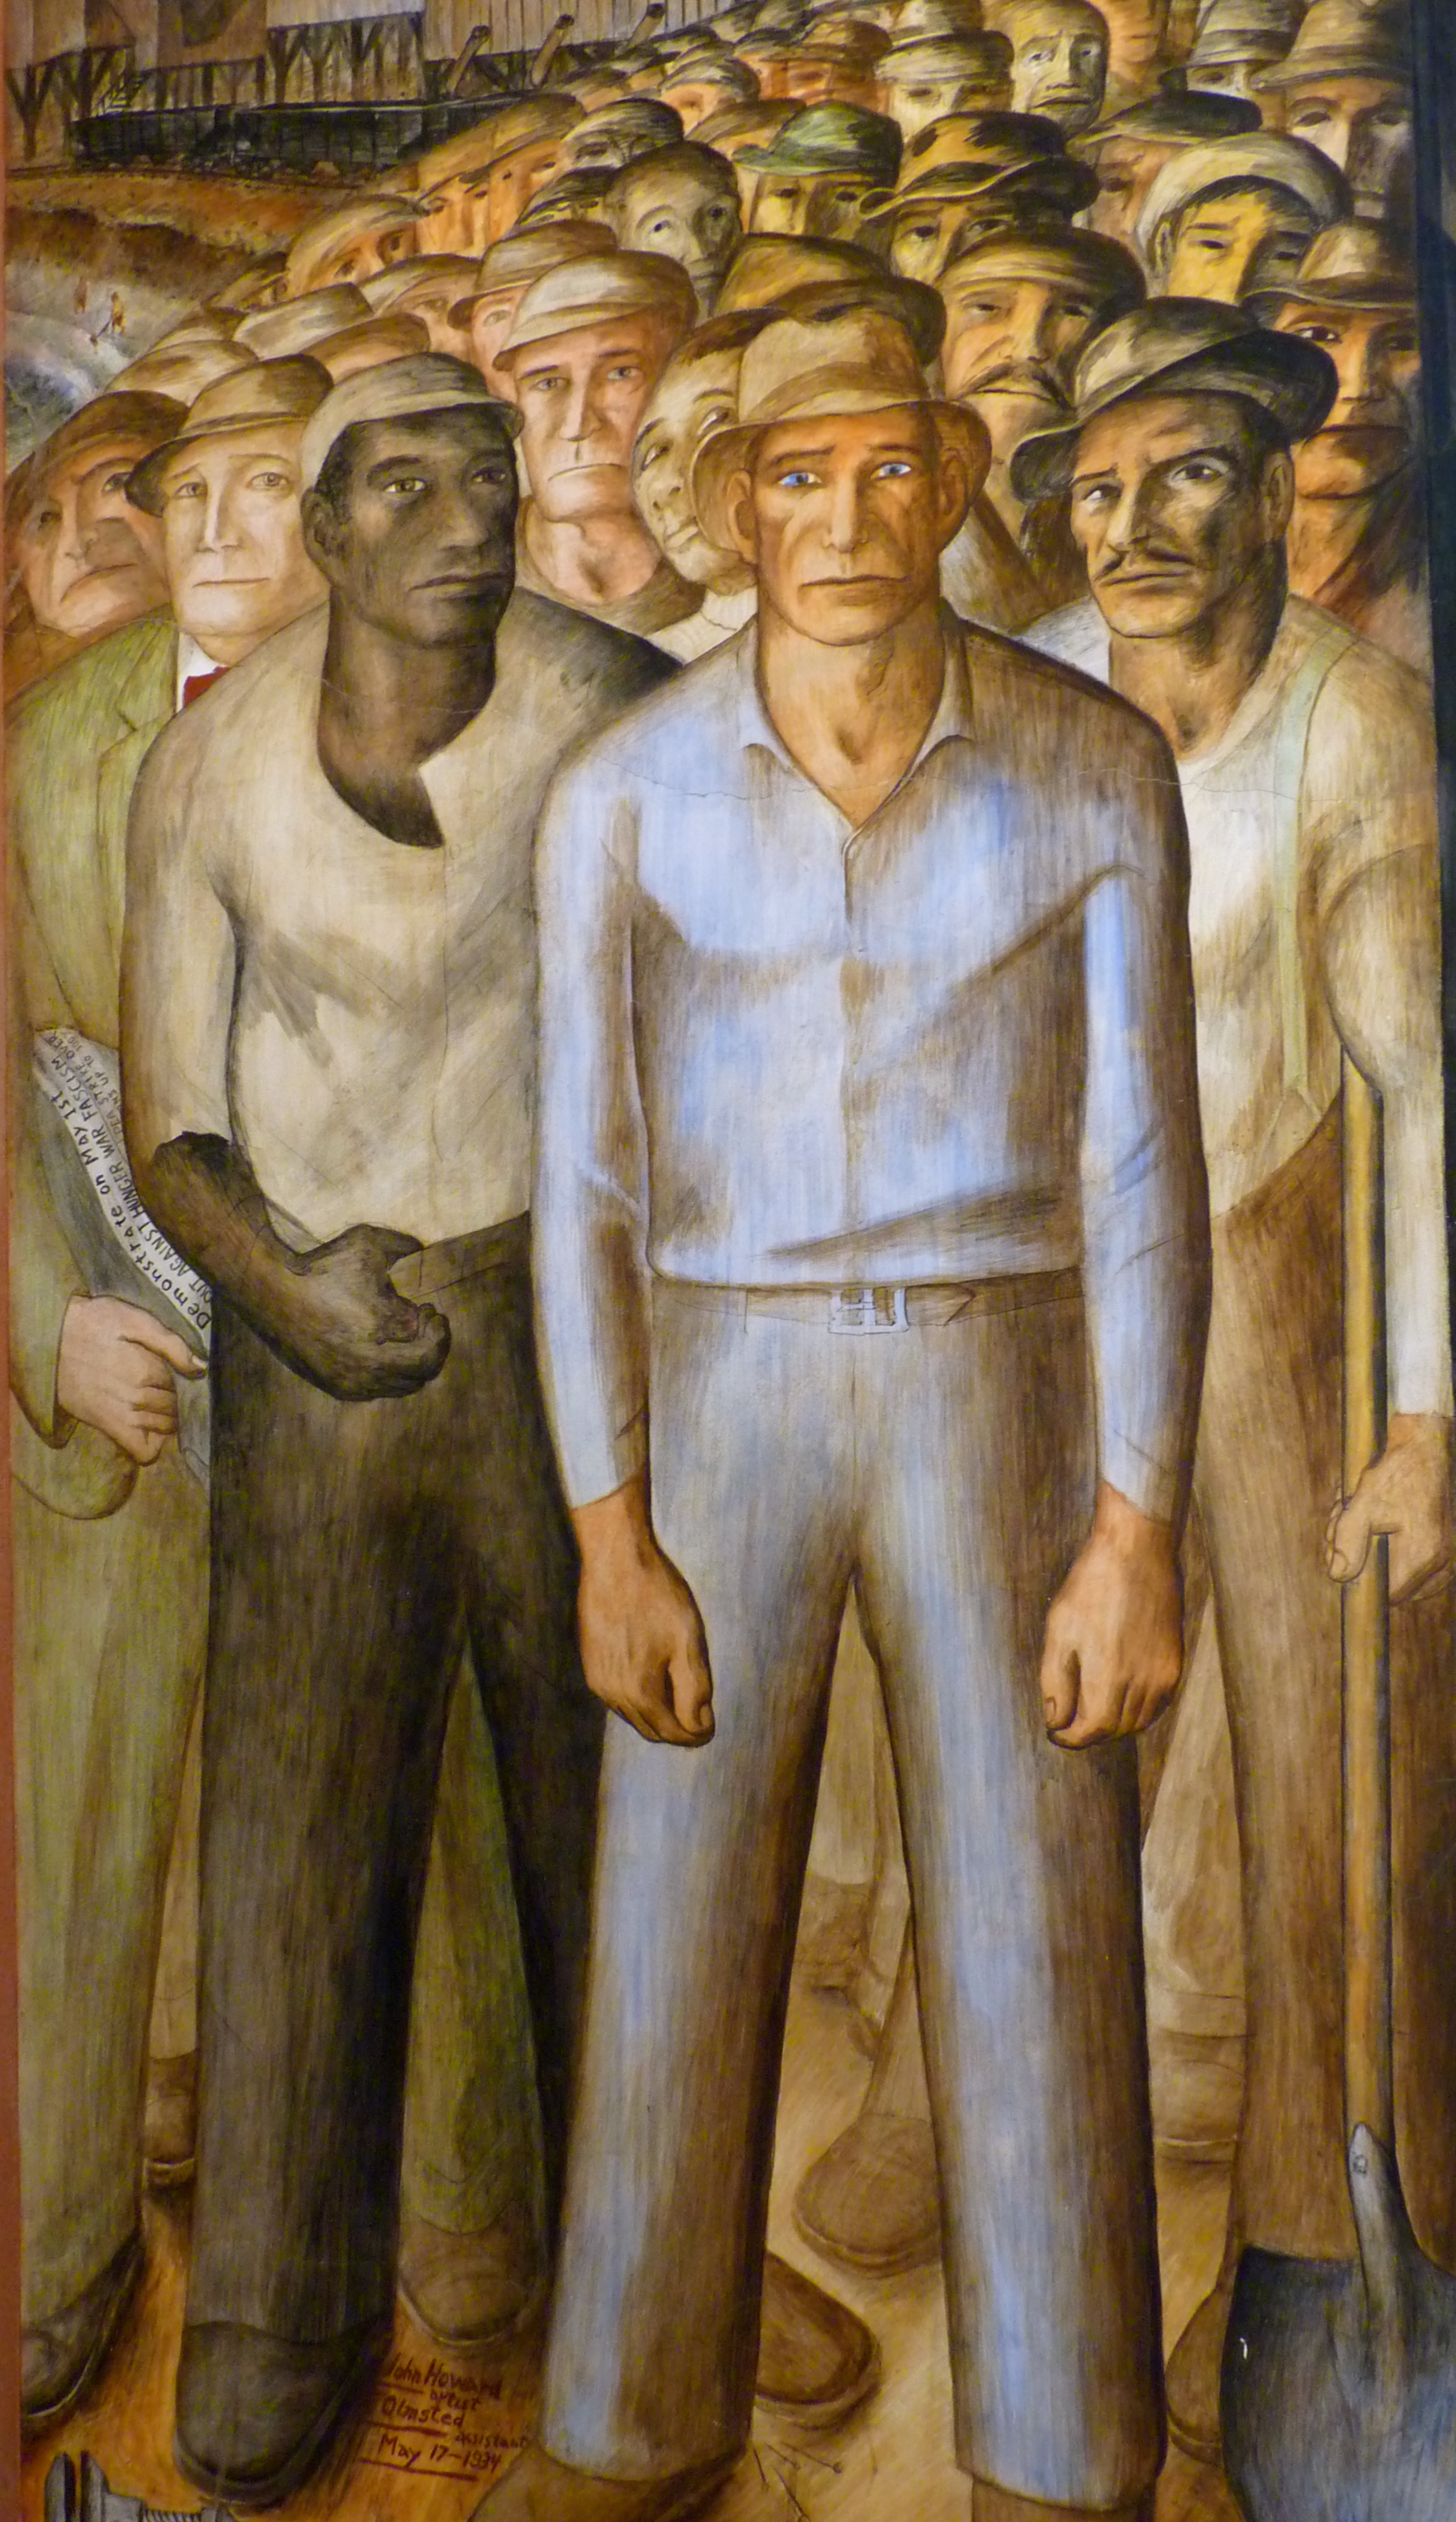 Coit Tower Mural - Striking Workers